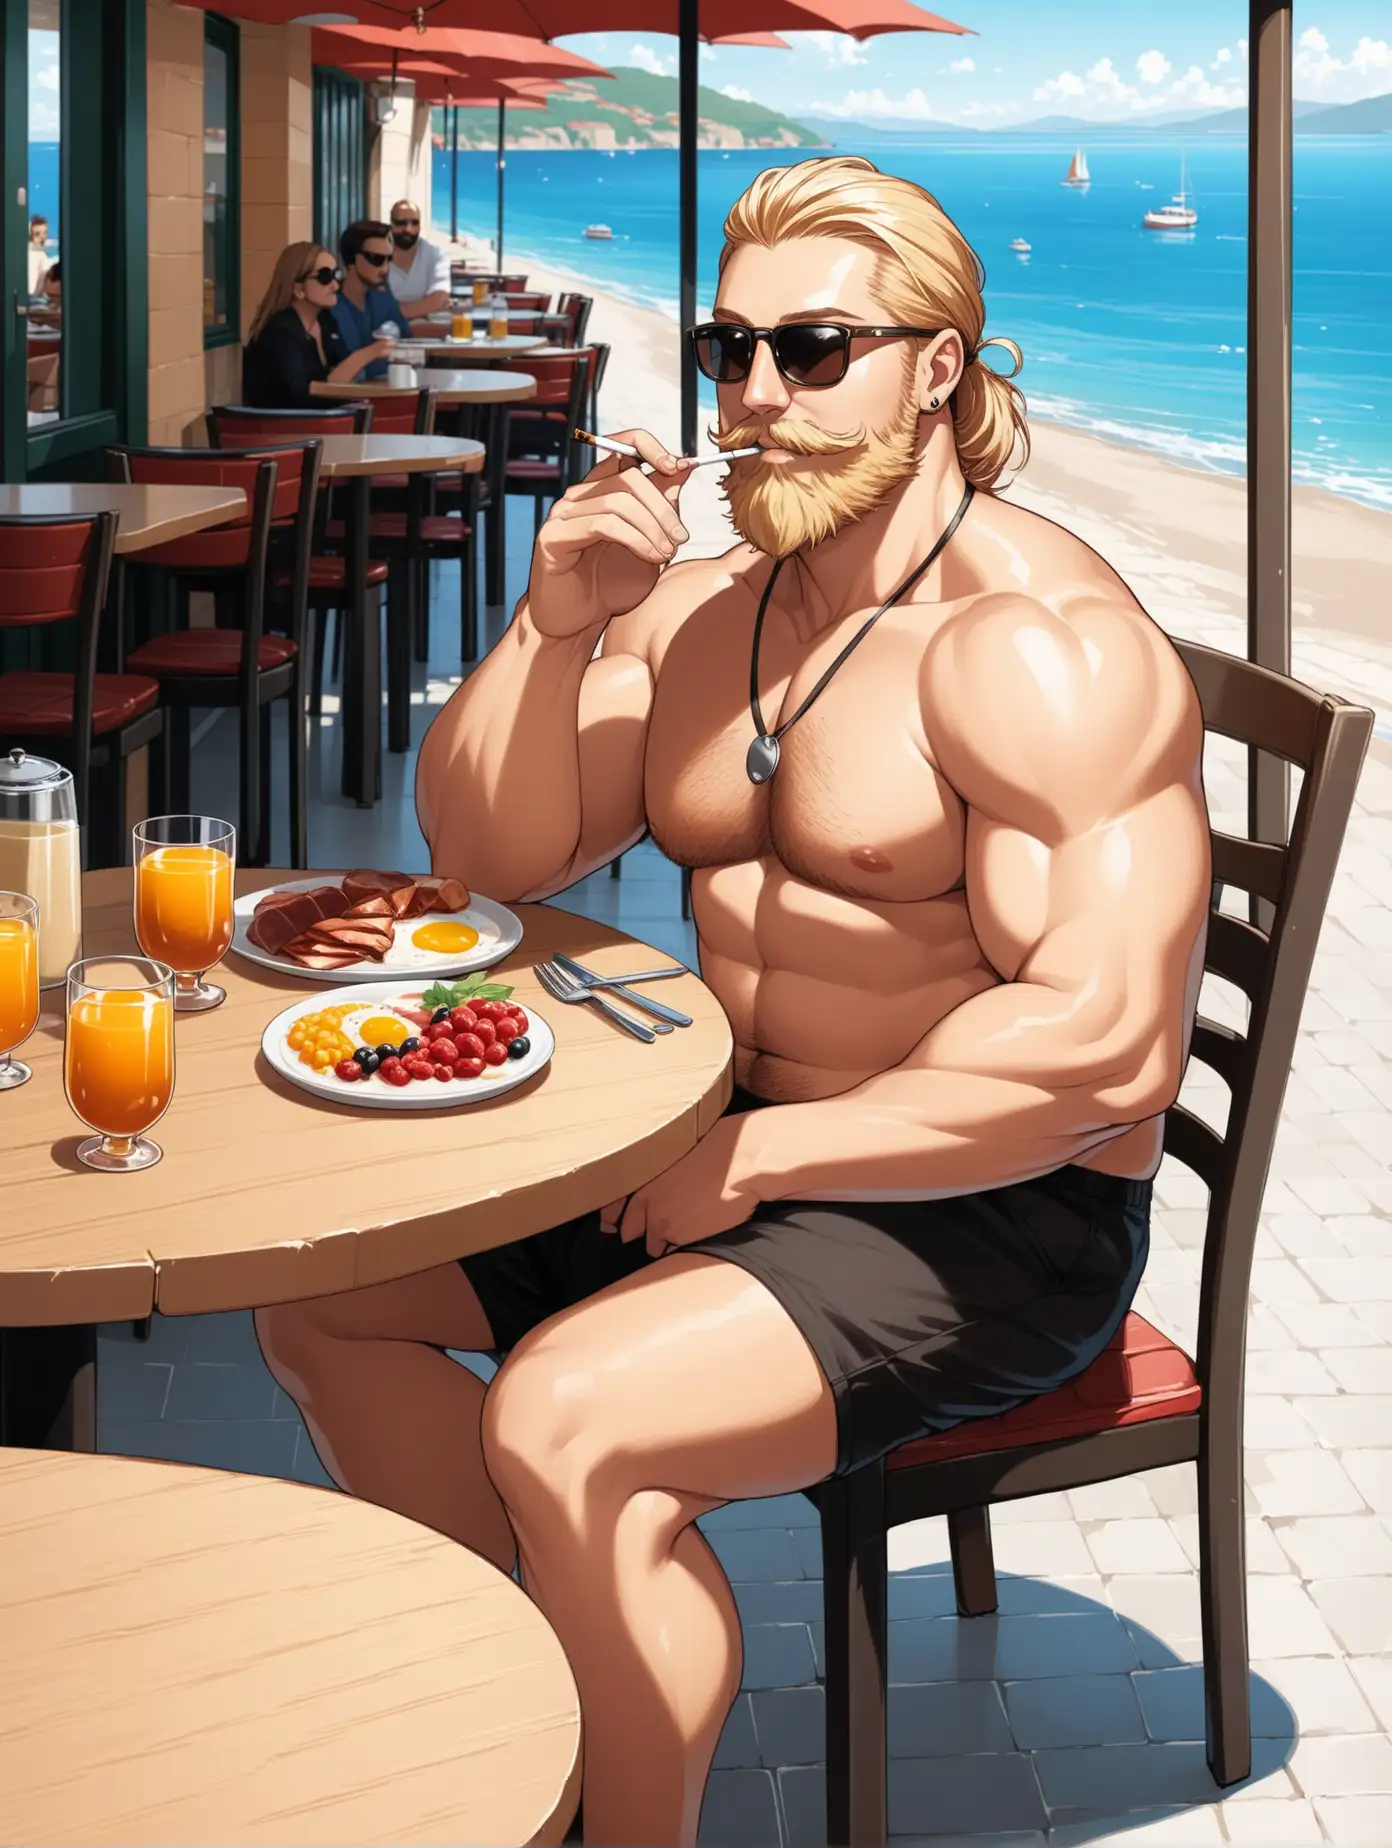 a tall, fit, curvy body, blonde norwegian man, lookalike Nanami Kento with stubbly beard wearing sunglasses, sitting in a cafe while smoking, Turkish Breakfast on the table, seaside, Turkey, full body, zoomed out